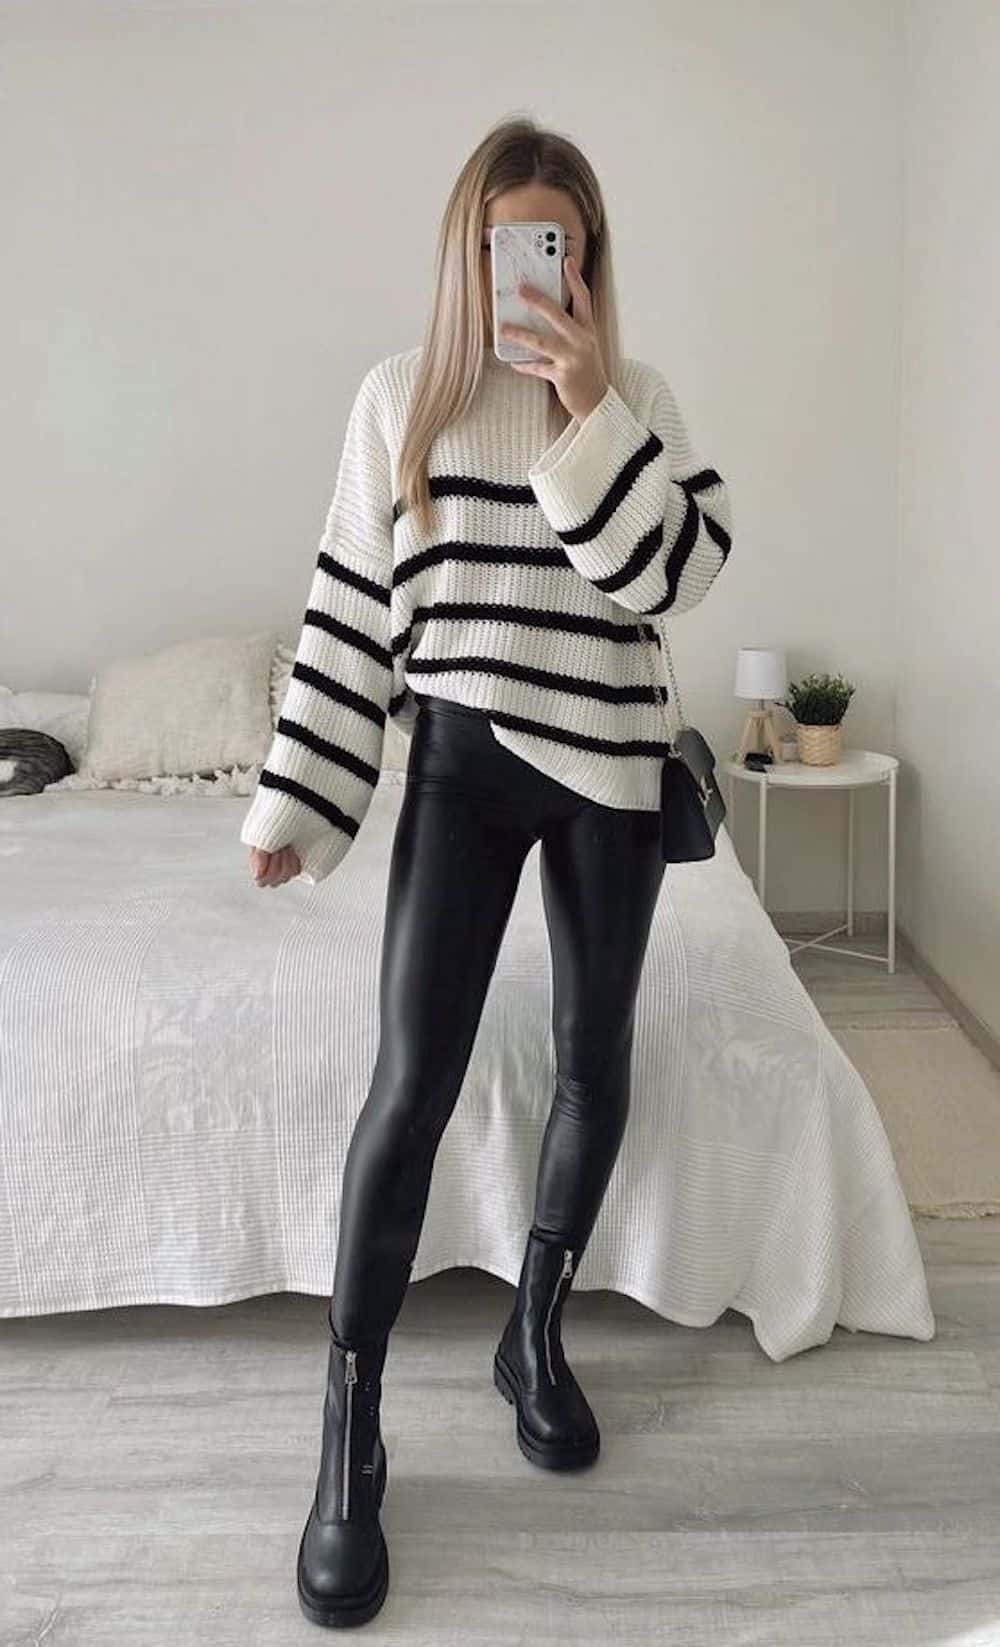 image of a woman in an oversized striped knit sweater, black faux leather leggings, and black lug boots